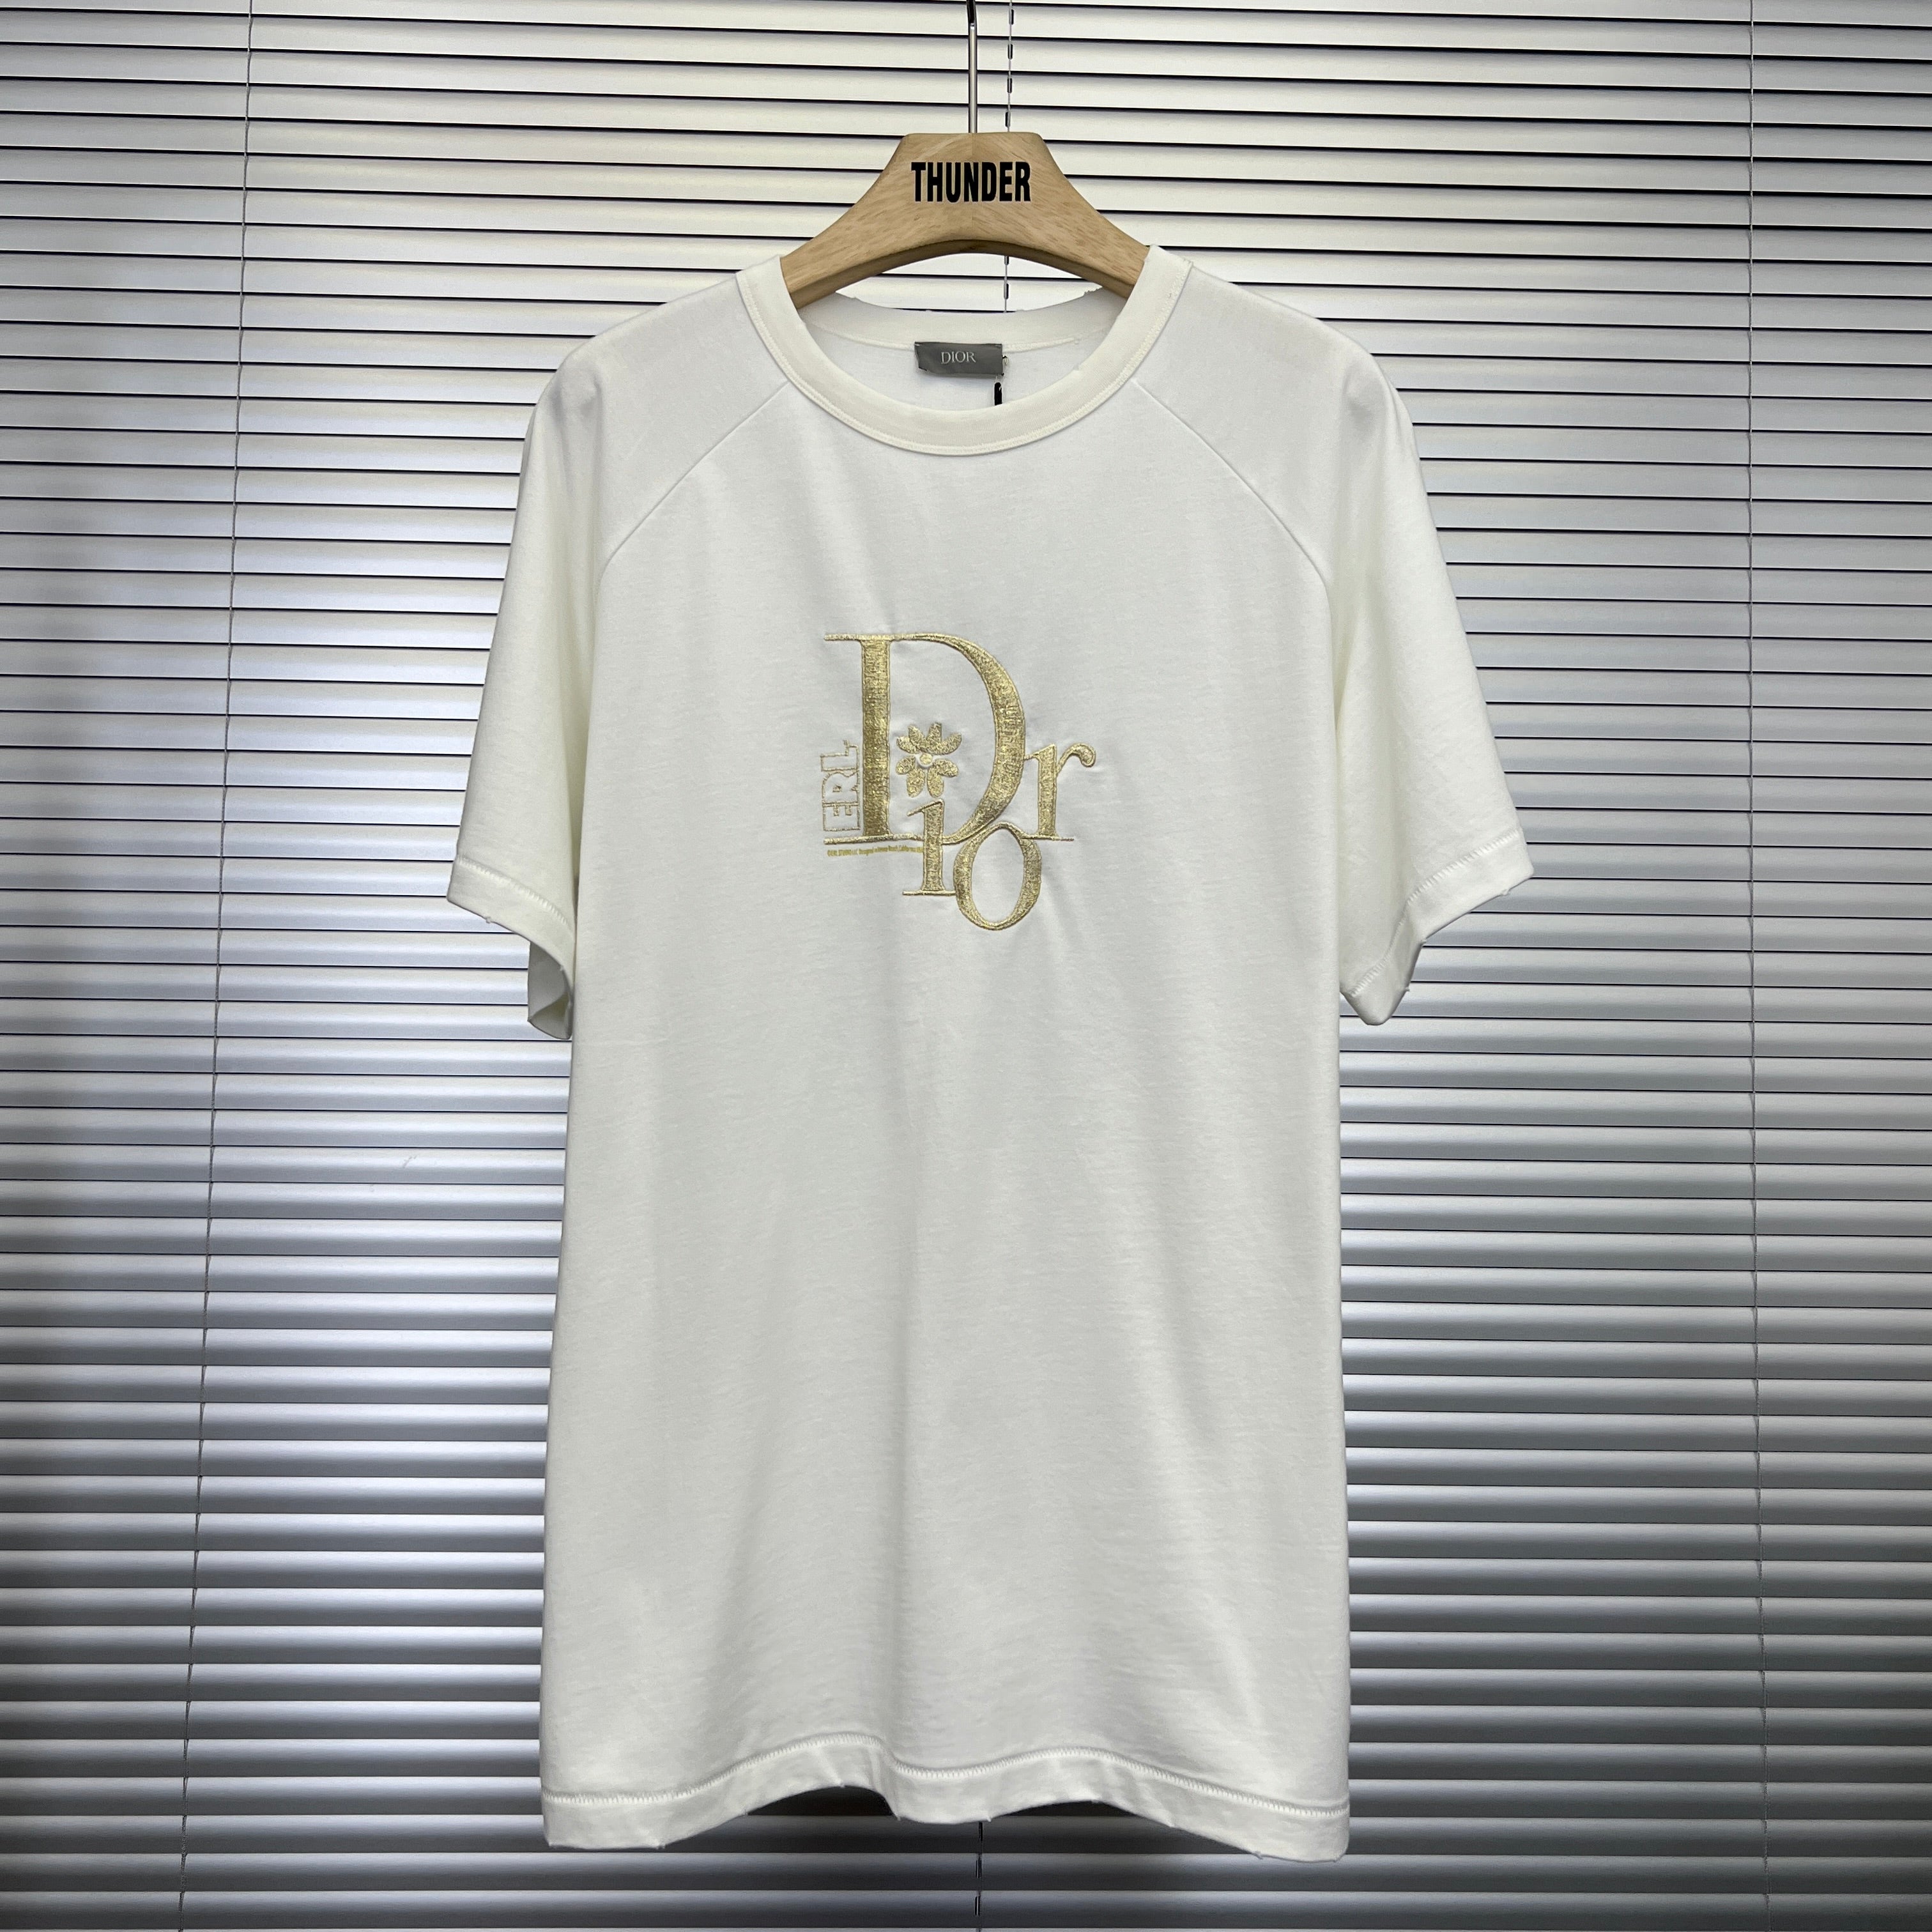 Dior relaxed fit by ERL T-shirt